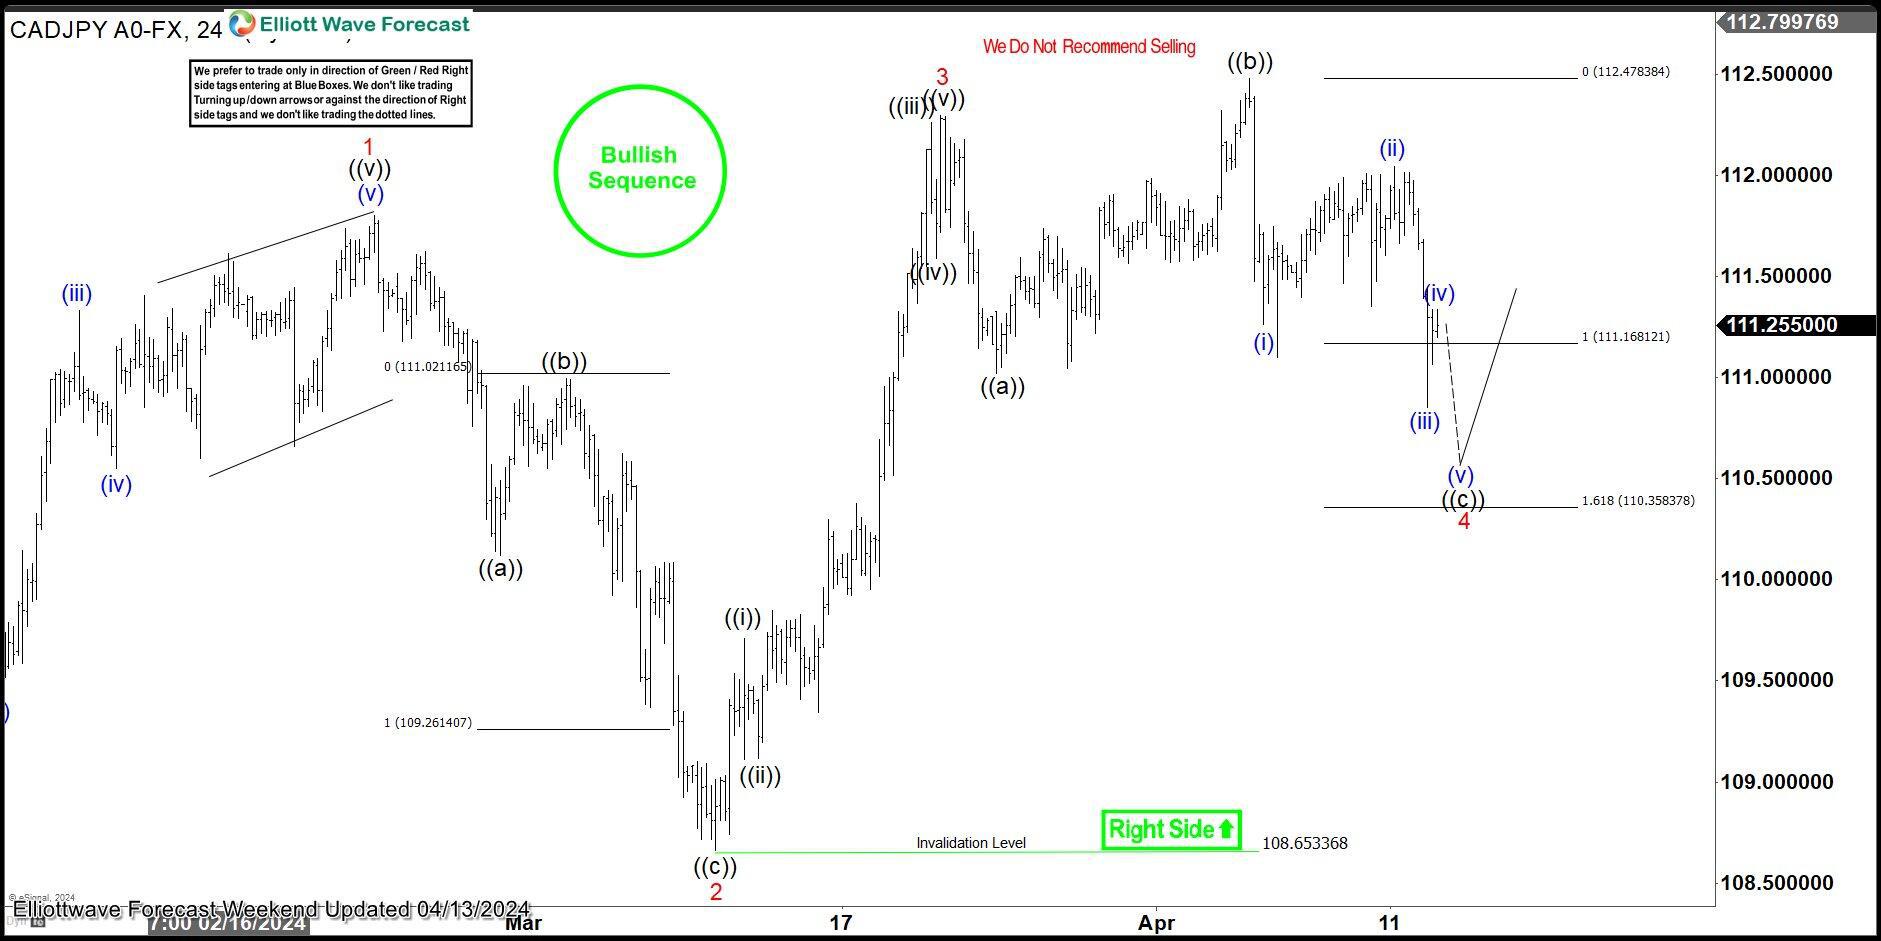 CAD/JPY Elliott Wave: Forecasting the rally after three waves pull back